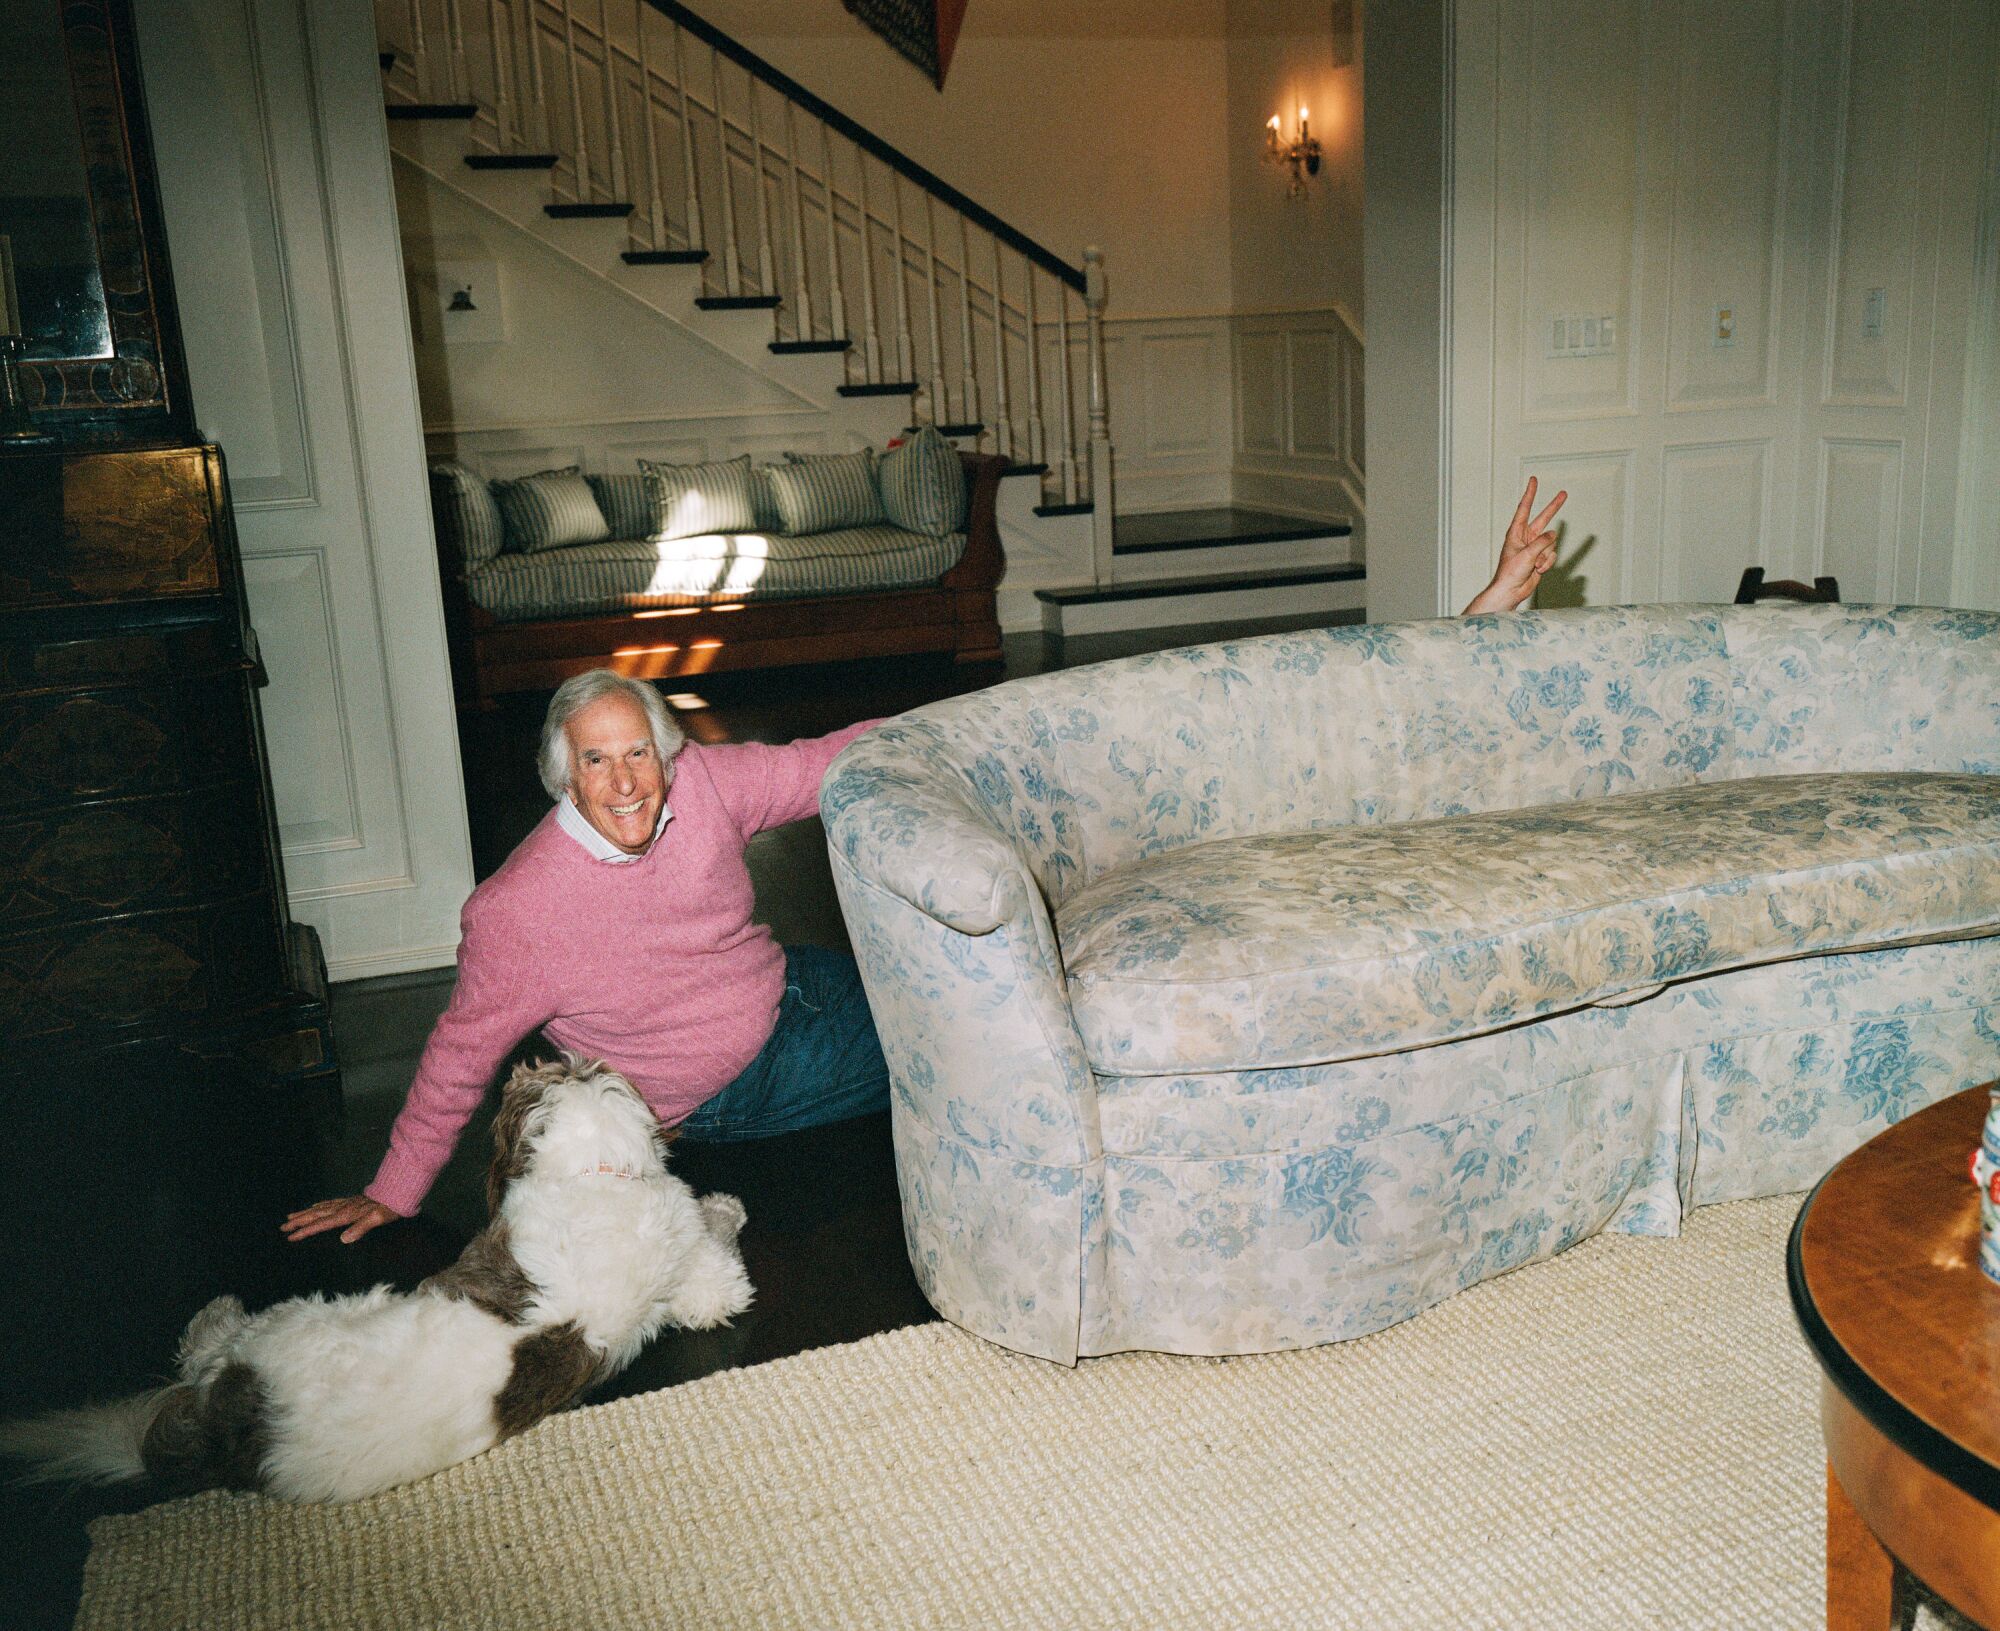 A man with a pink sweater sits on the ground with a dog as a hand is seen from a behind a floral couch